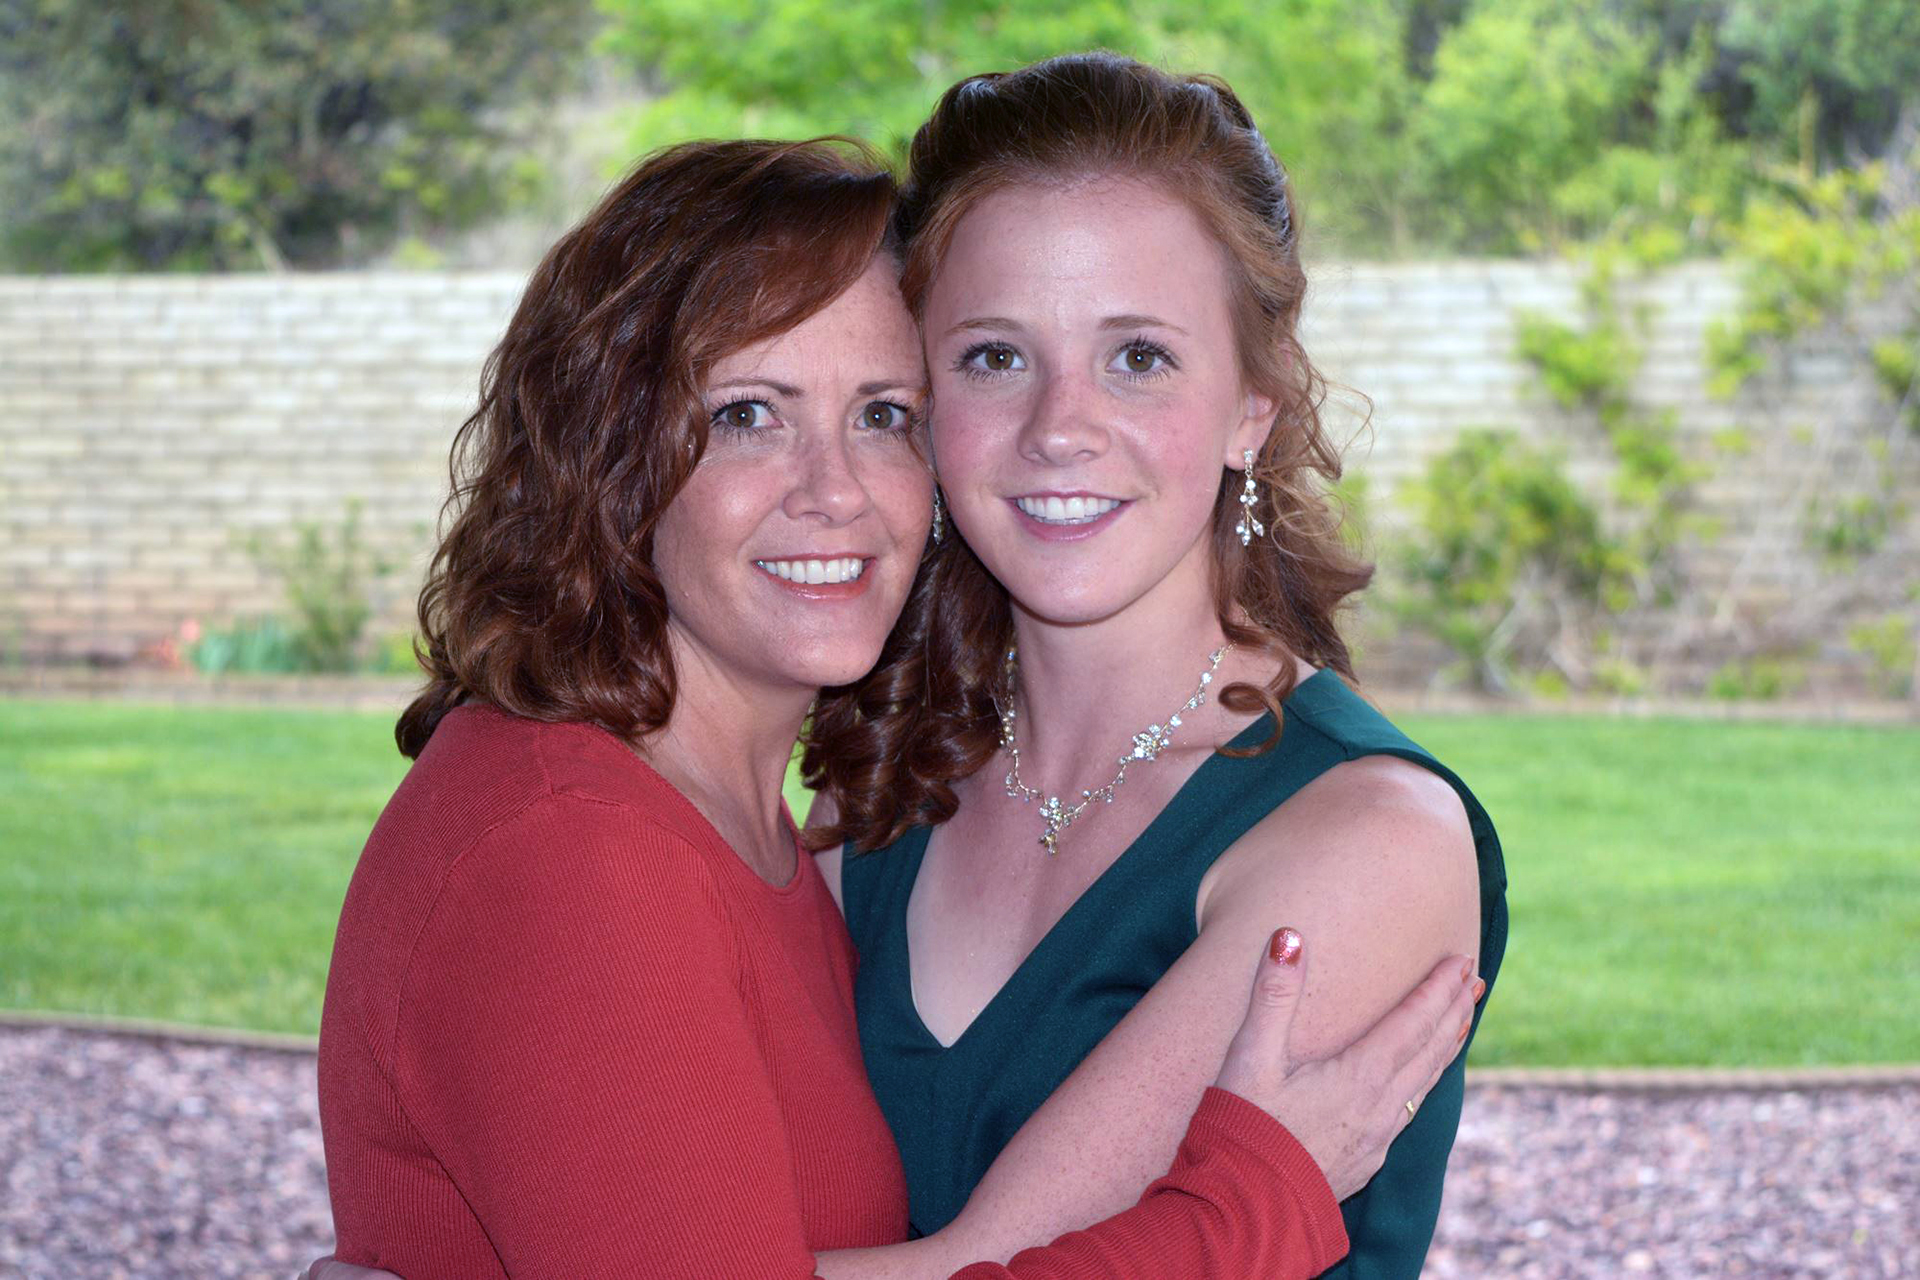 Winners selected in 2021 MotherDaughter Lookalike contest The Daily